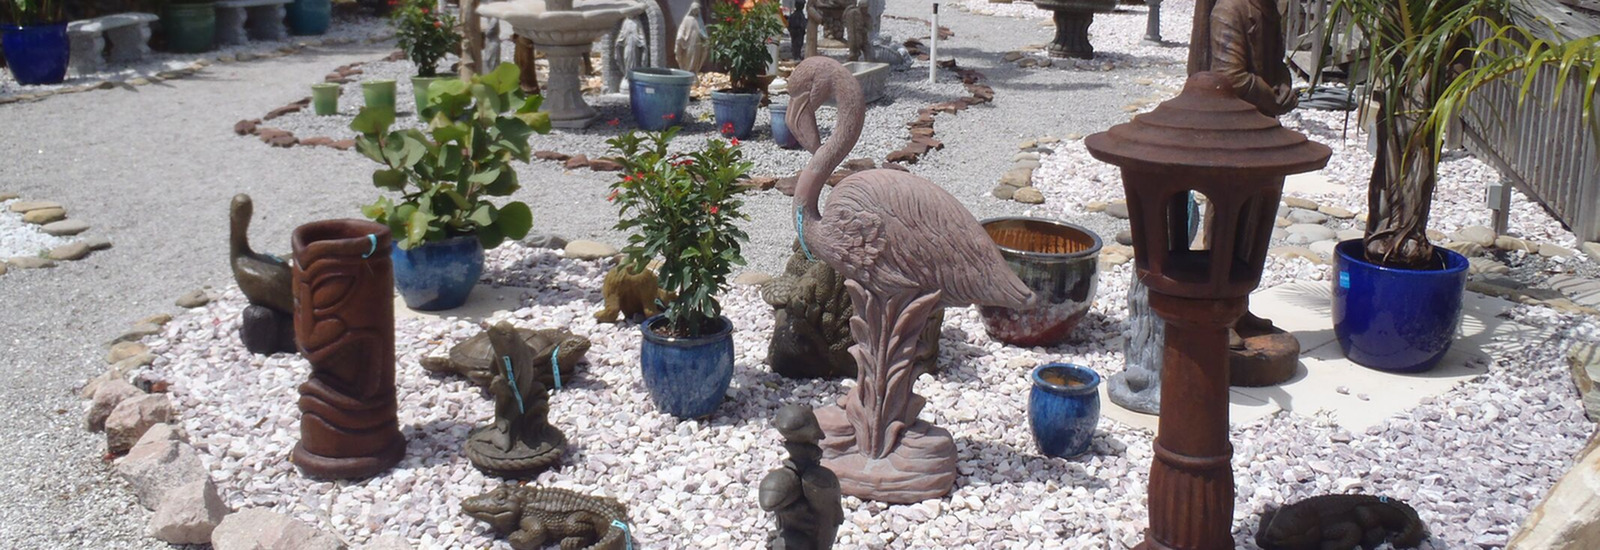 Rock garden with statues